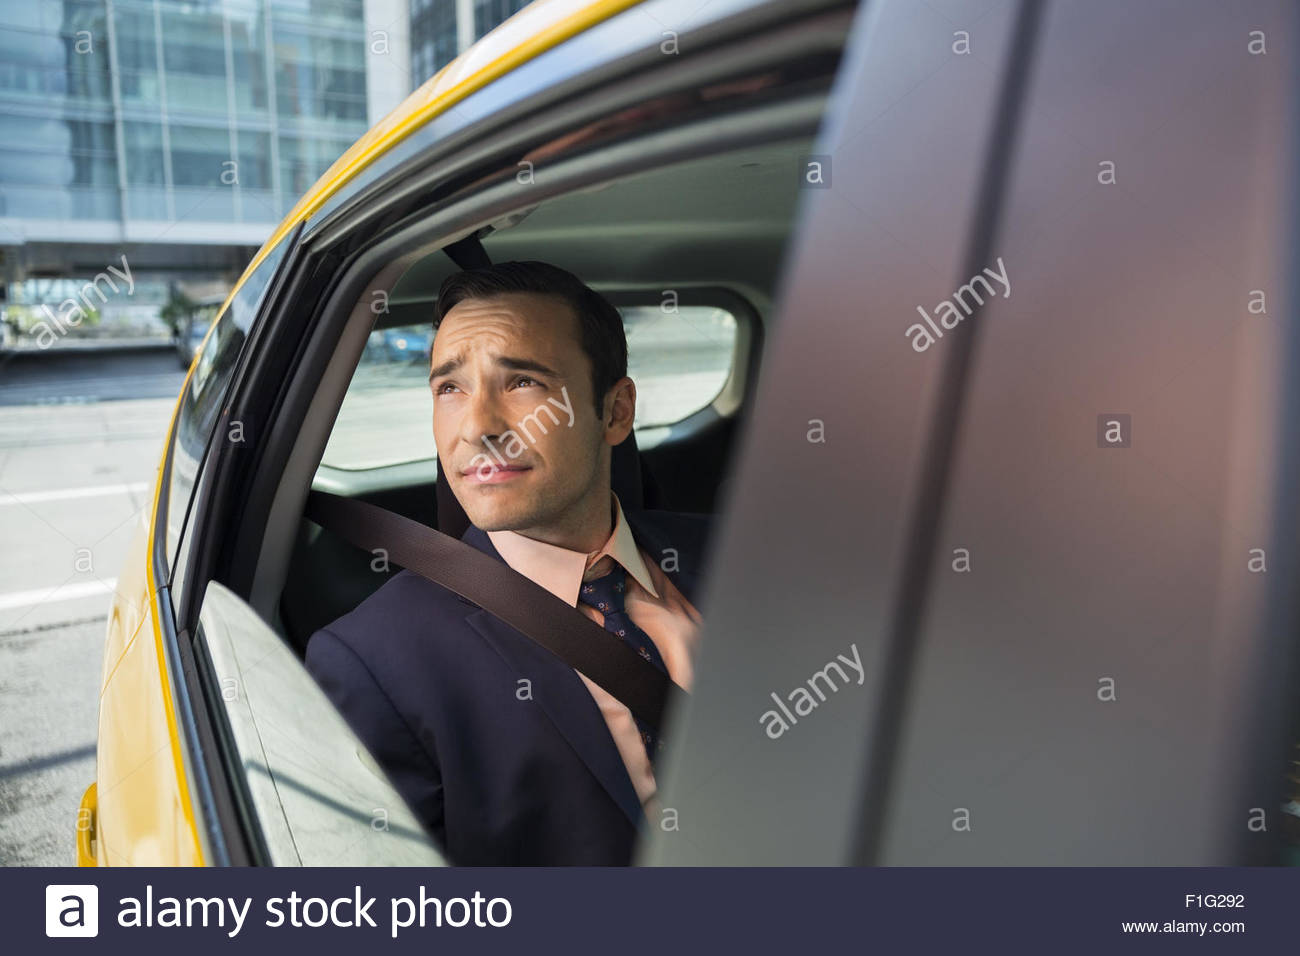 Businessman looking out window of taxi Stock Photo